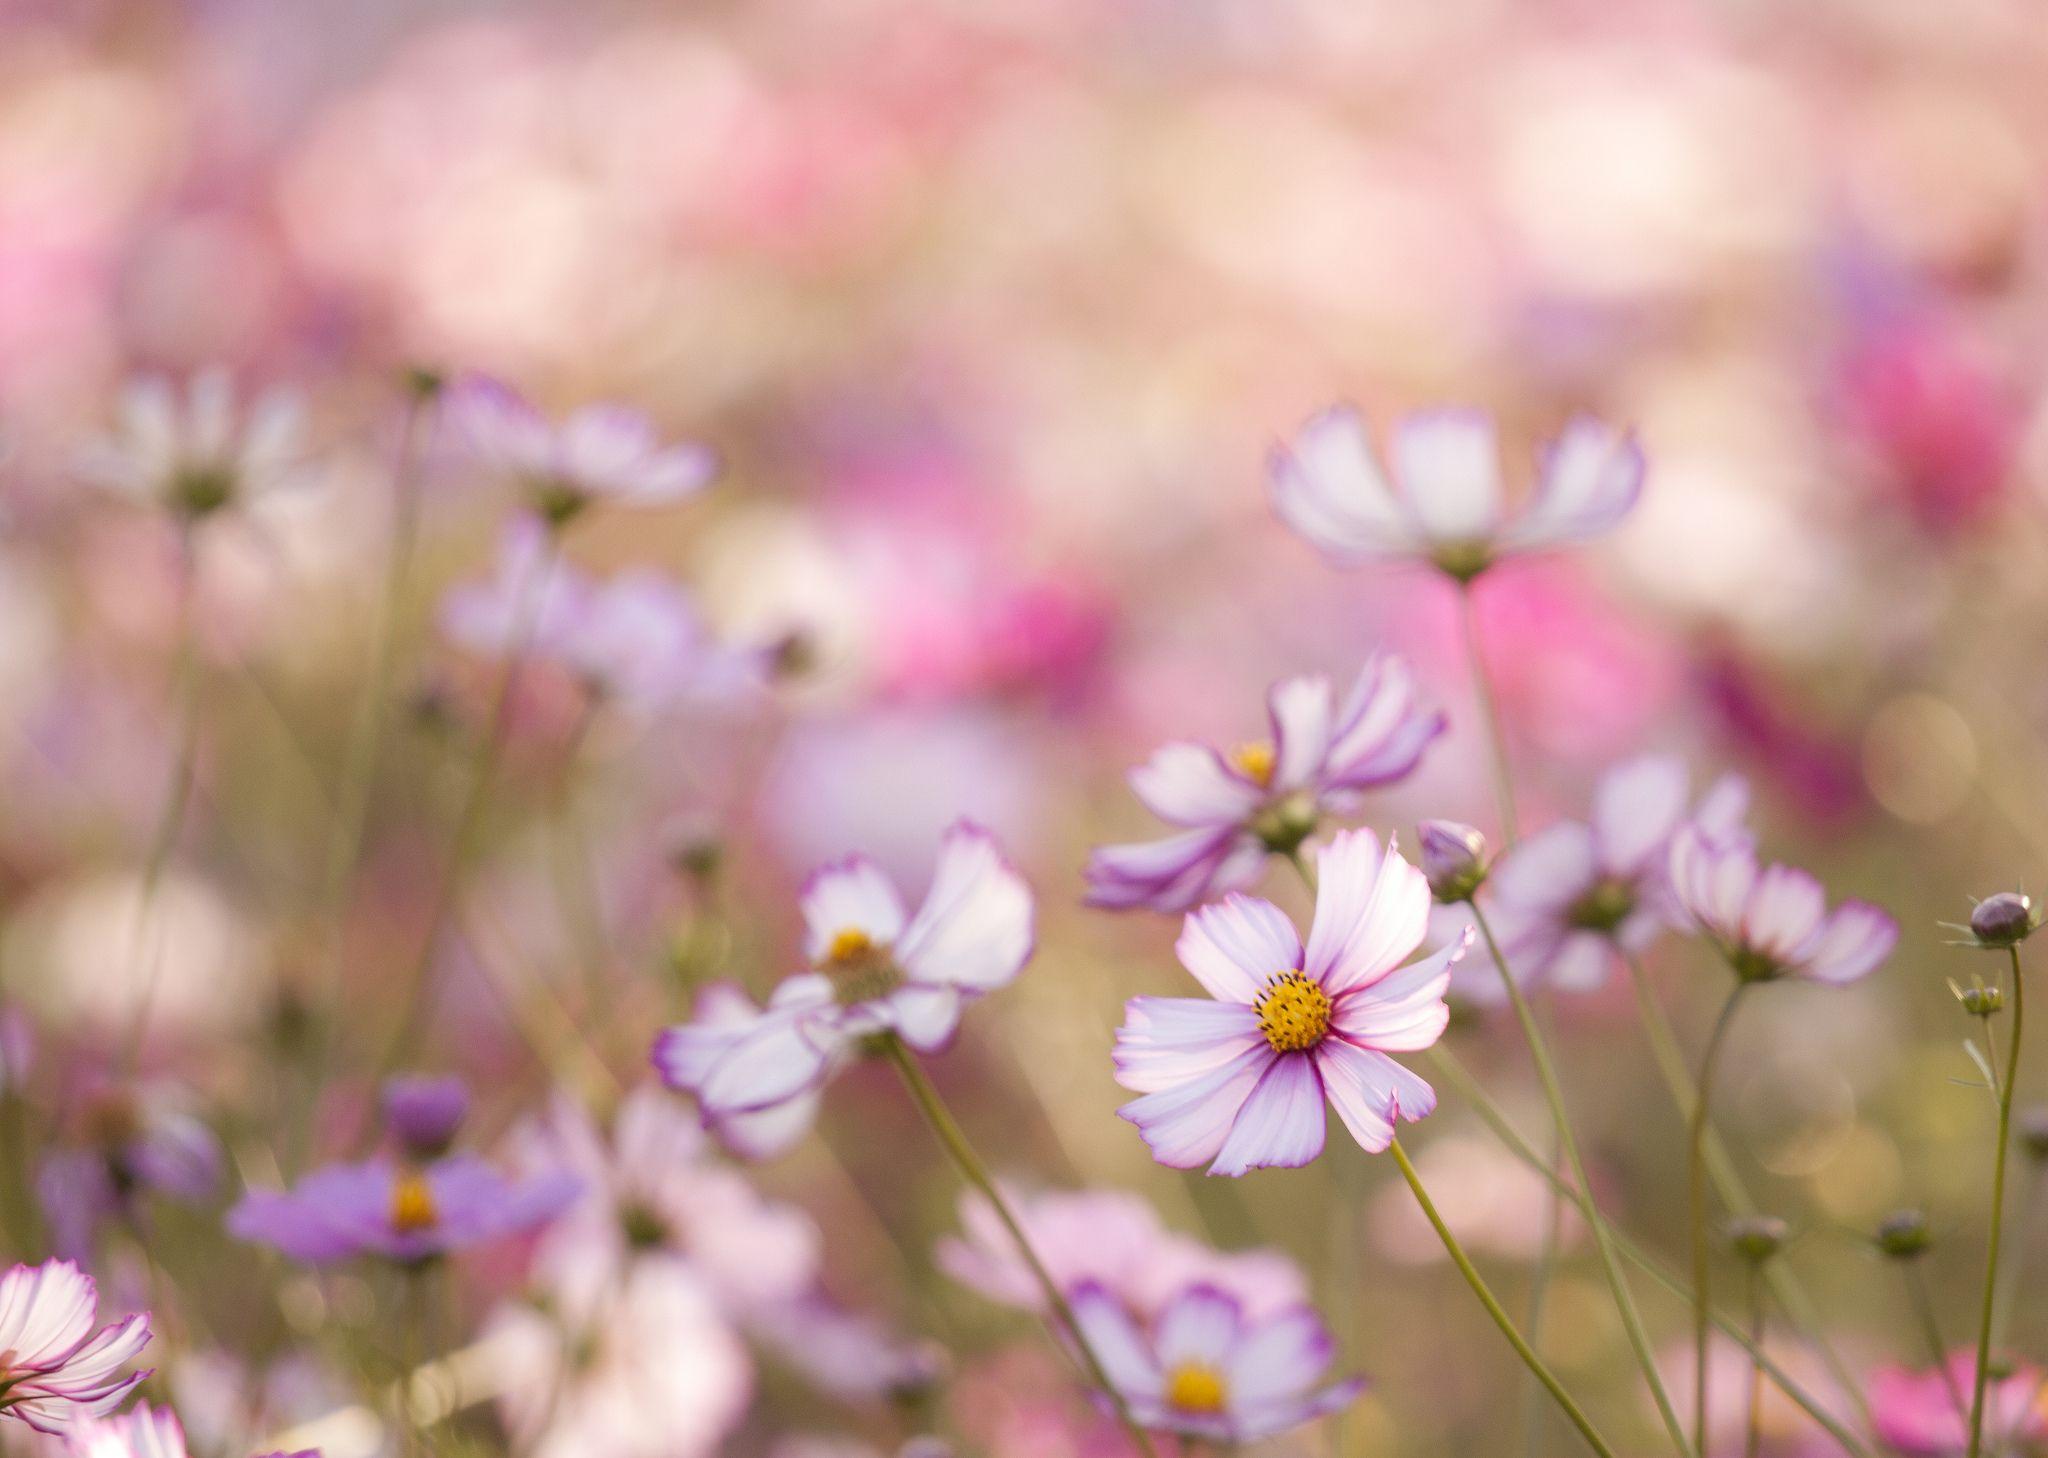 Cosmos Flower Wallpapers - Top Free Cosmos Flower Backgrounds ...